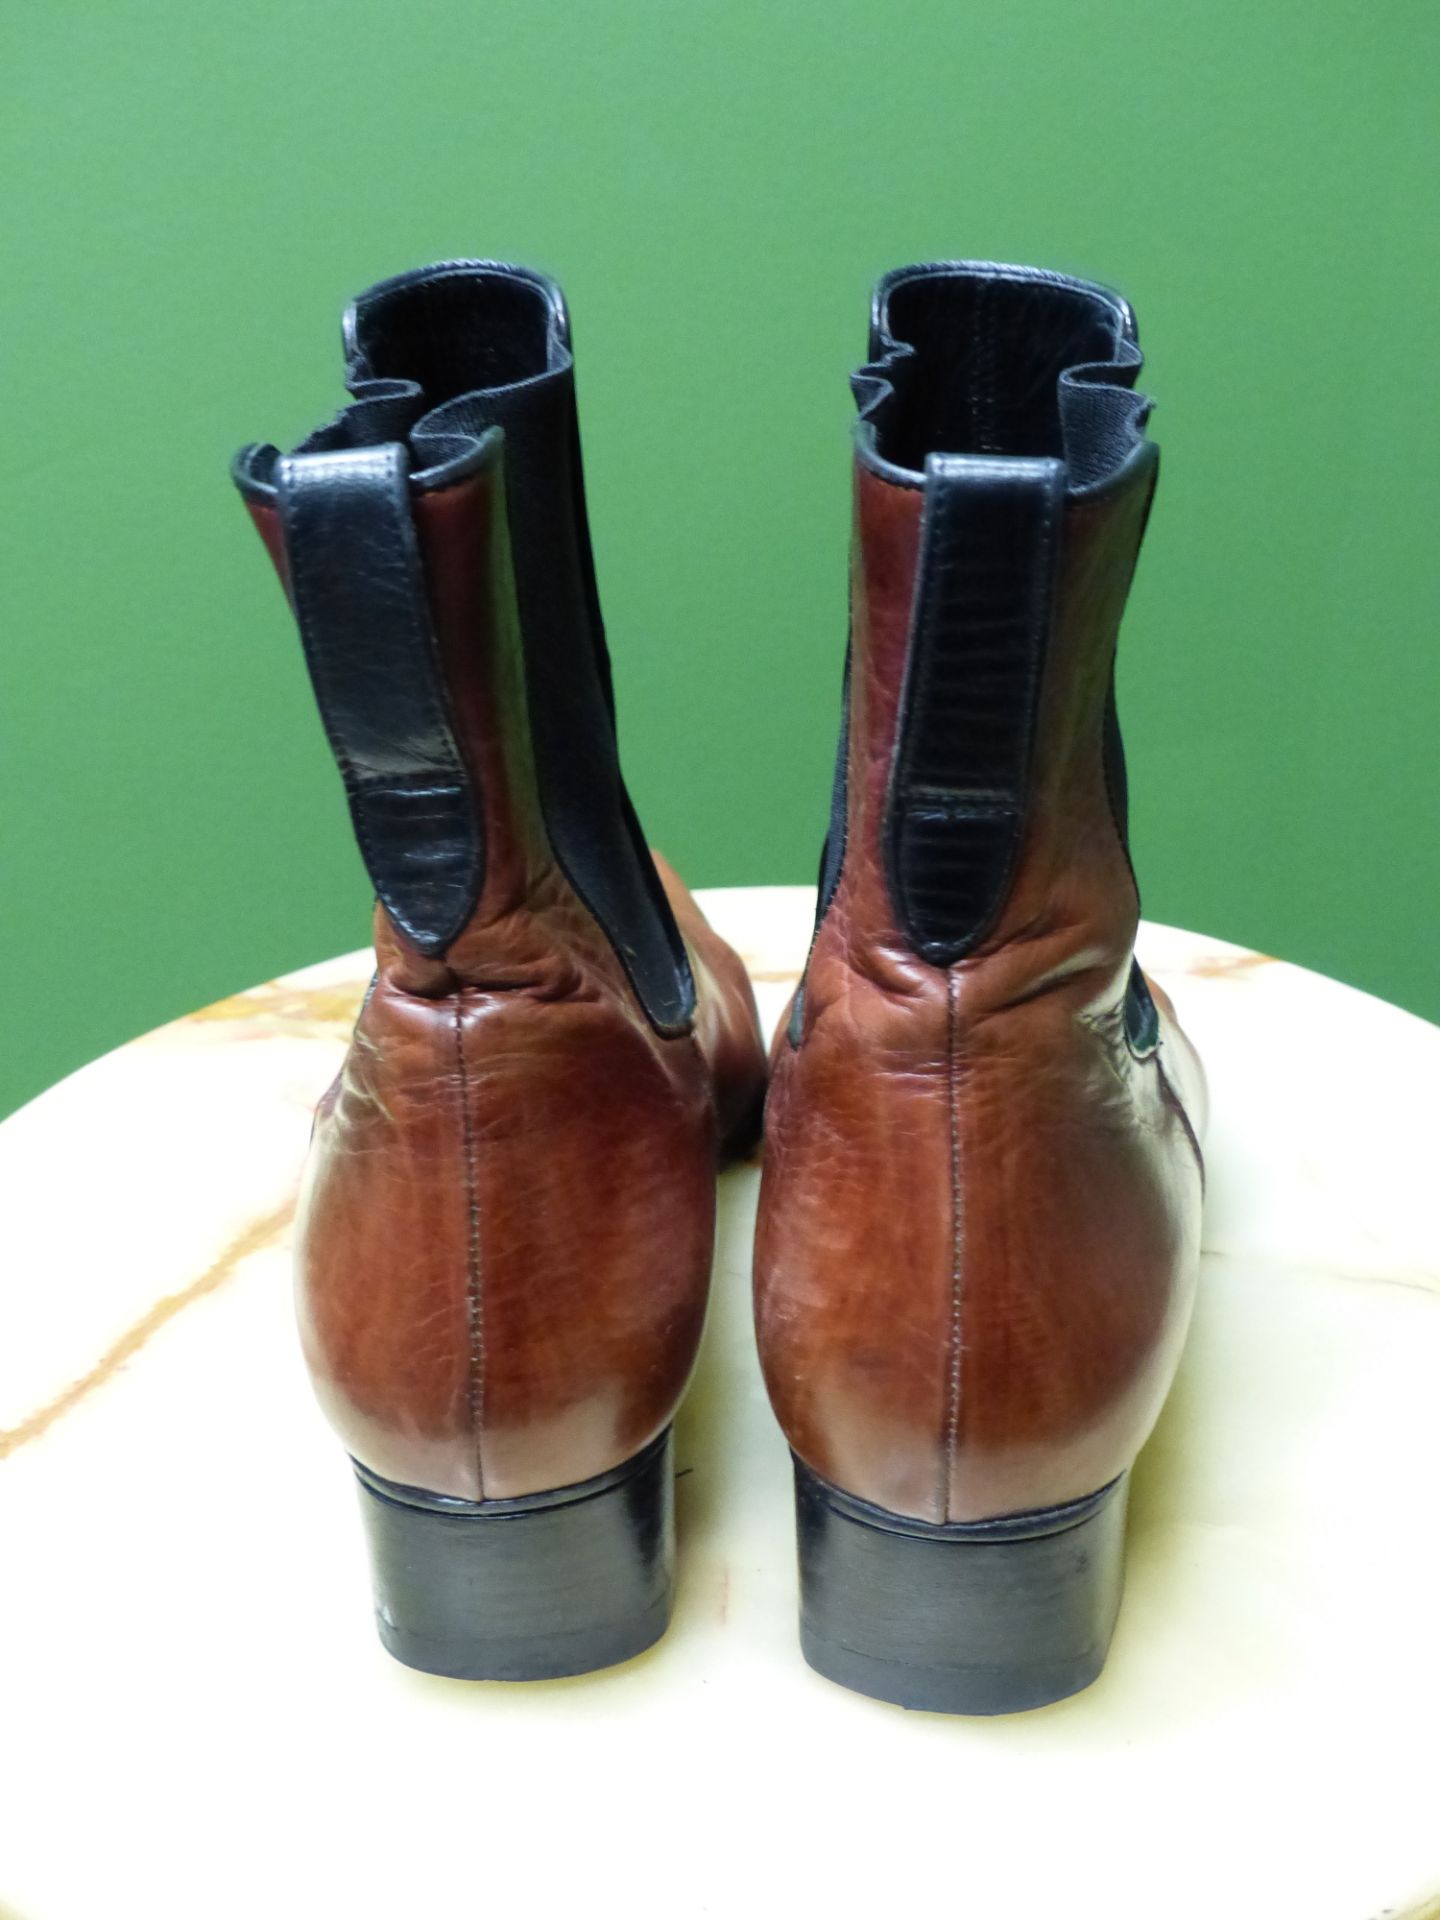 SHOES. LORENZO BANFI ITALY BLACK LEATHER COURT SHOES EUR SIZE 39.5. TOGETHER WITH BROWN BOOTS SIZE - Image 9 of 10